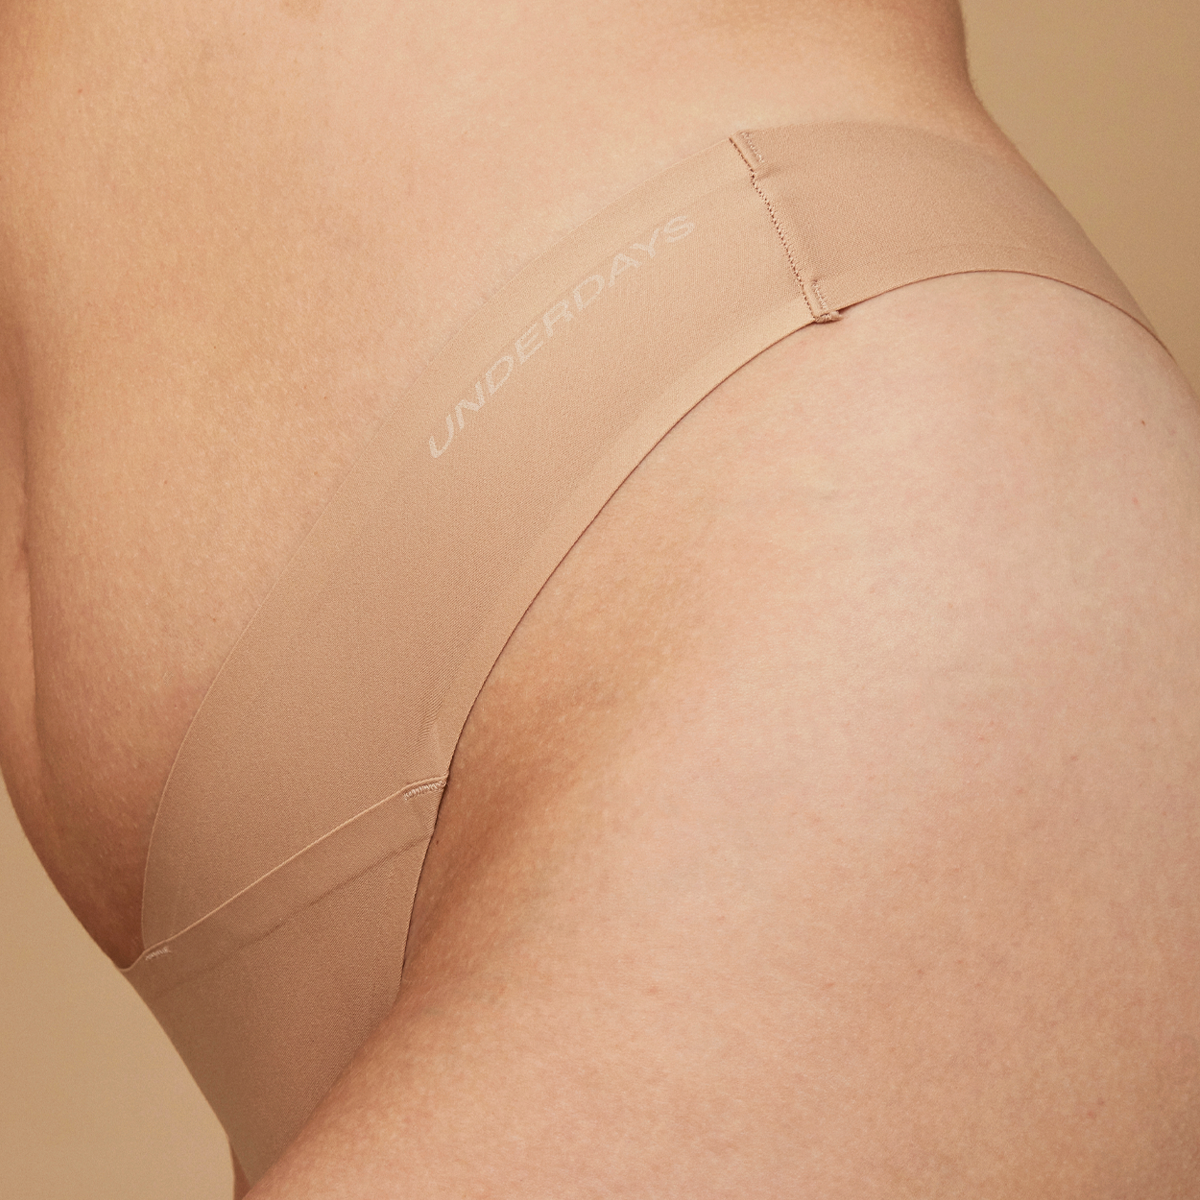 The Bare Basics Thong 3-Pack •  - The underwear